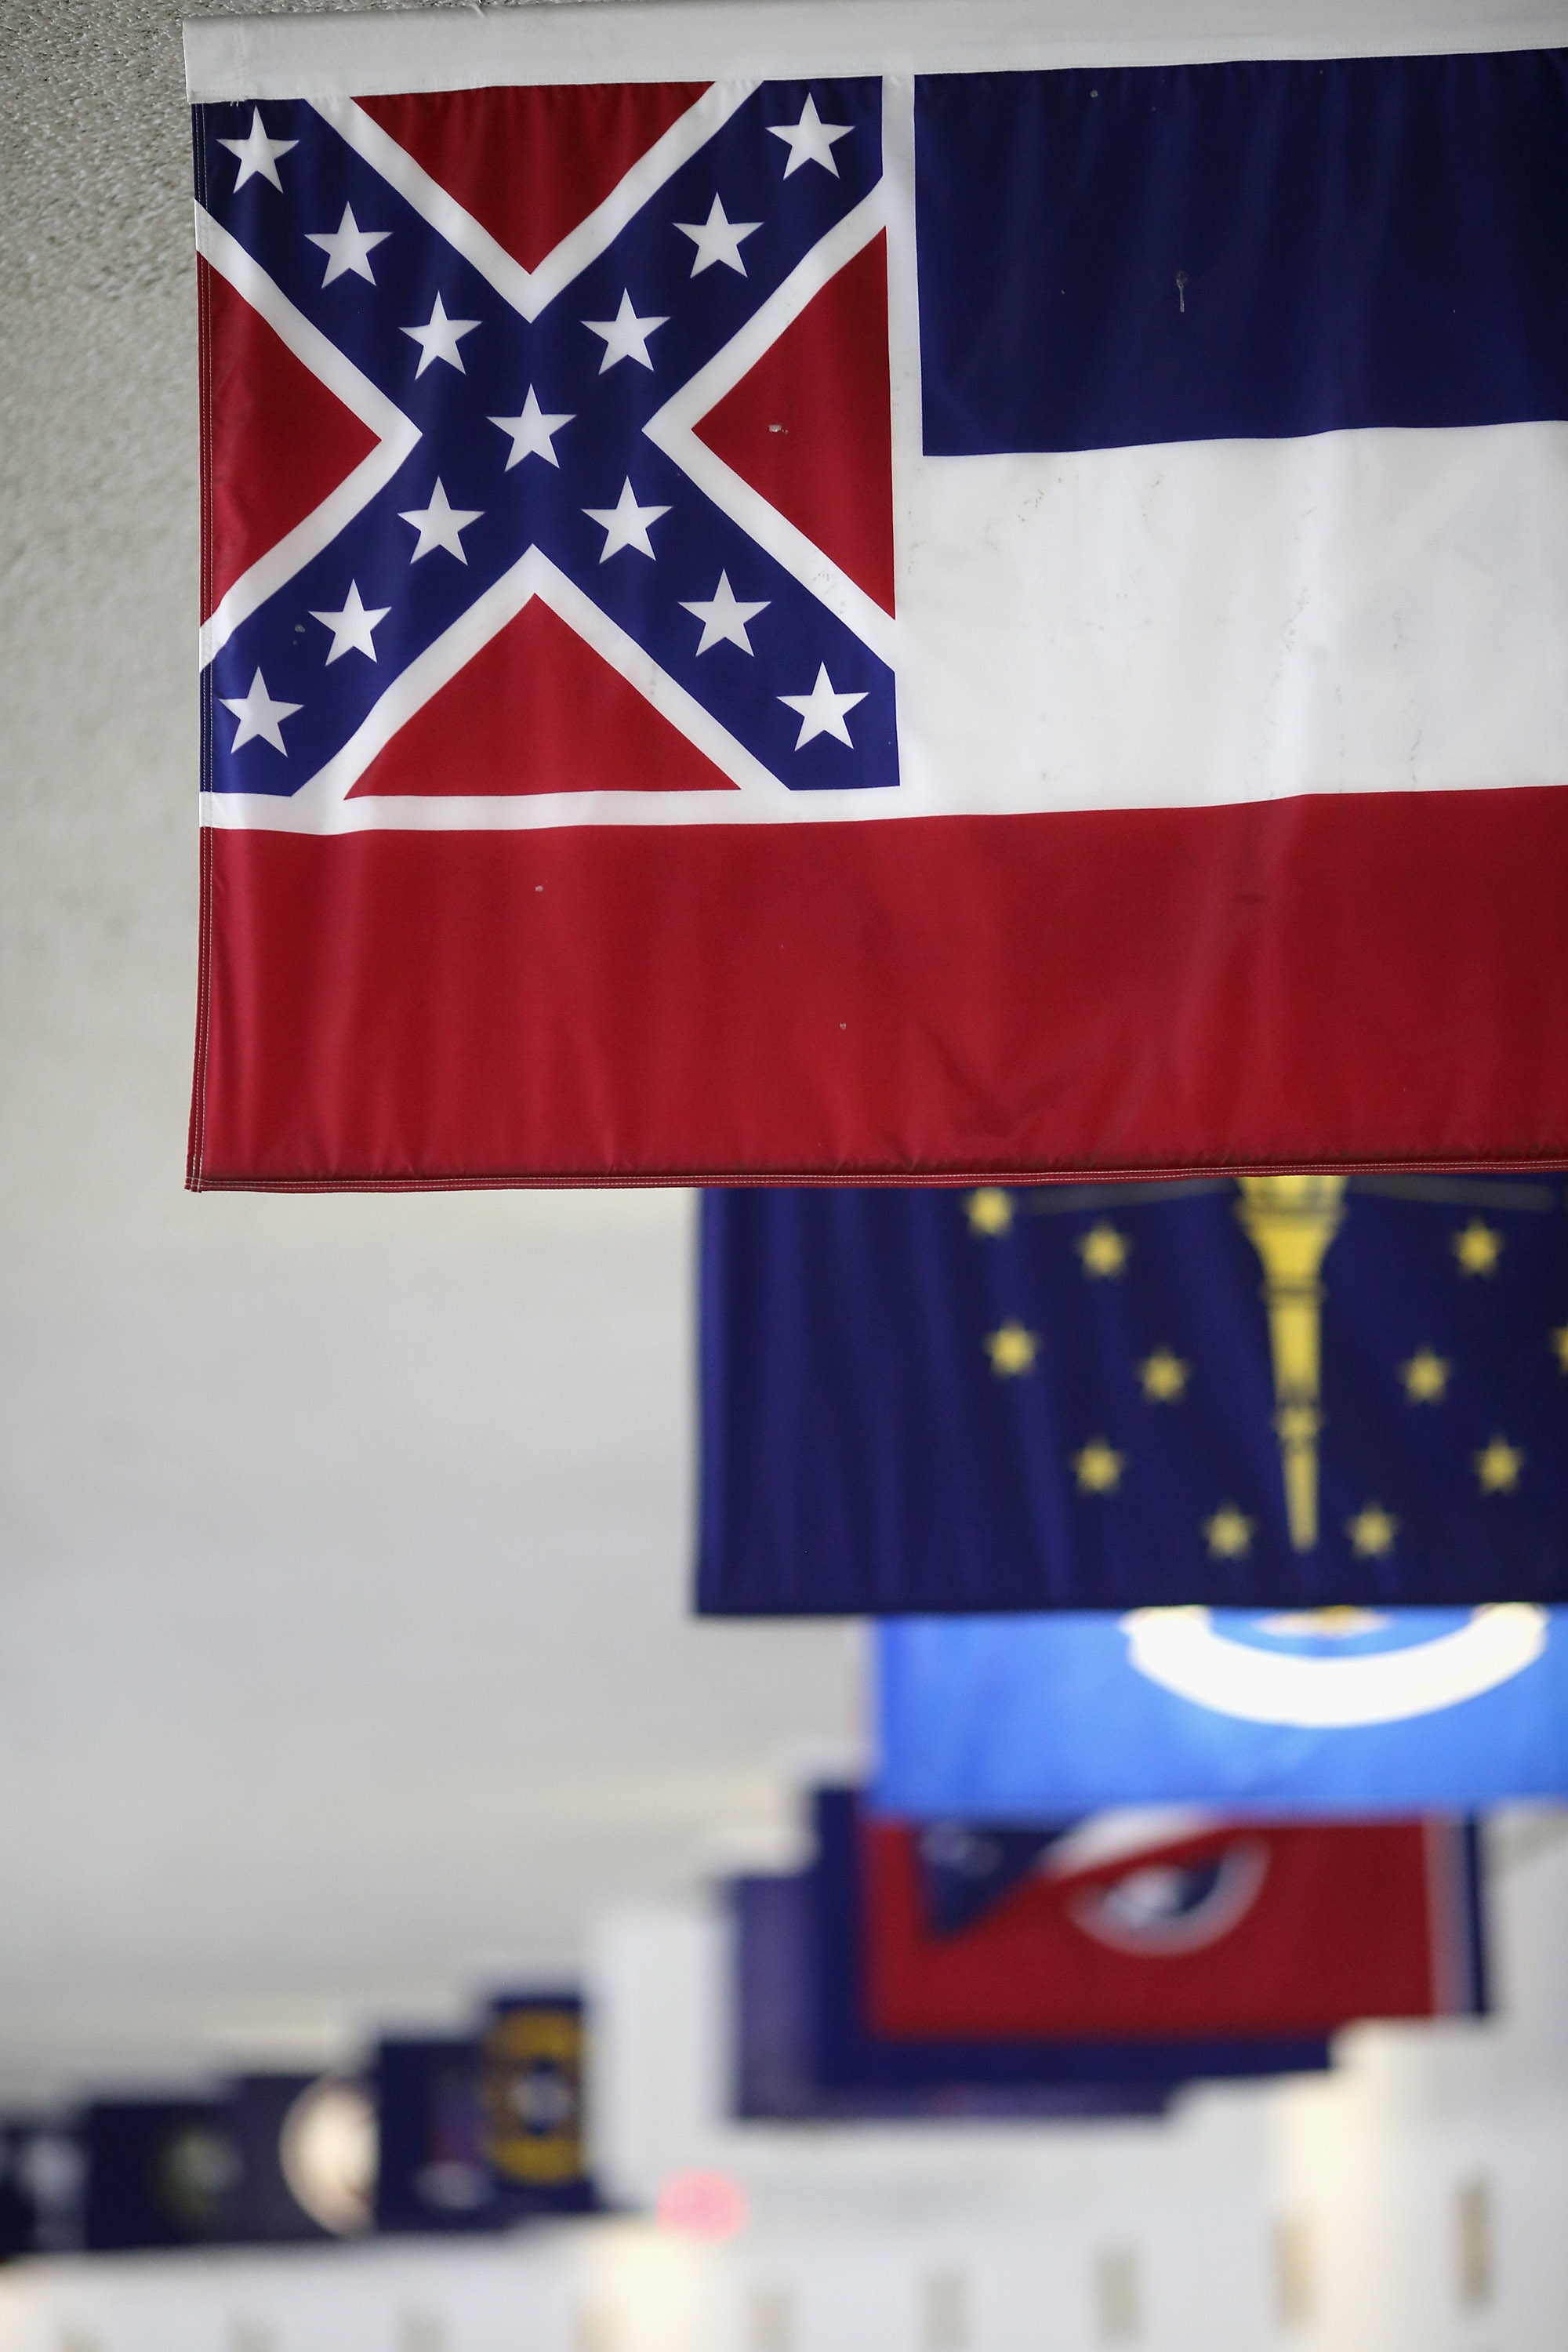 The state flag of Mississippi, which incorporates the flag of the Confederate States of America in the top left corner, is displayed with the flags of the other 49 states and territories in the tunnel connecting the senate office building and the U.S. Capitol June 23, 2015 in Washington, DC. (Photo by Chip Somodevilla/Getty Images)